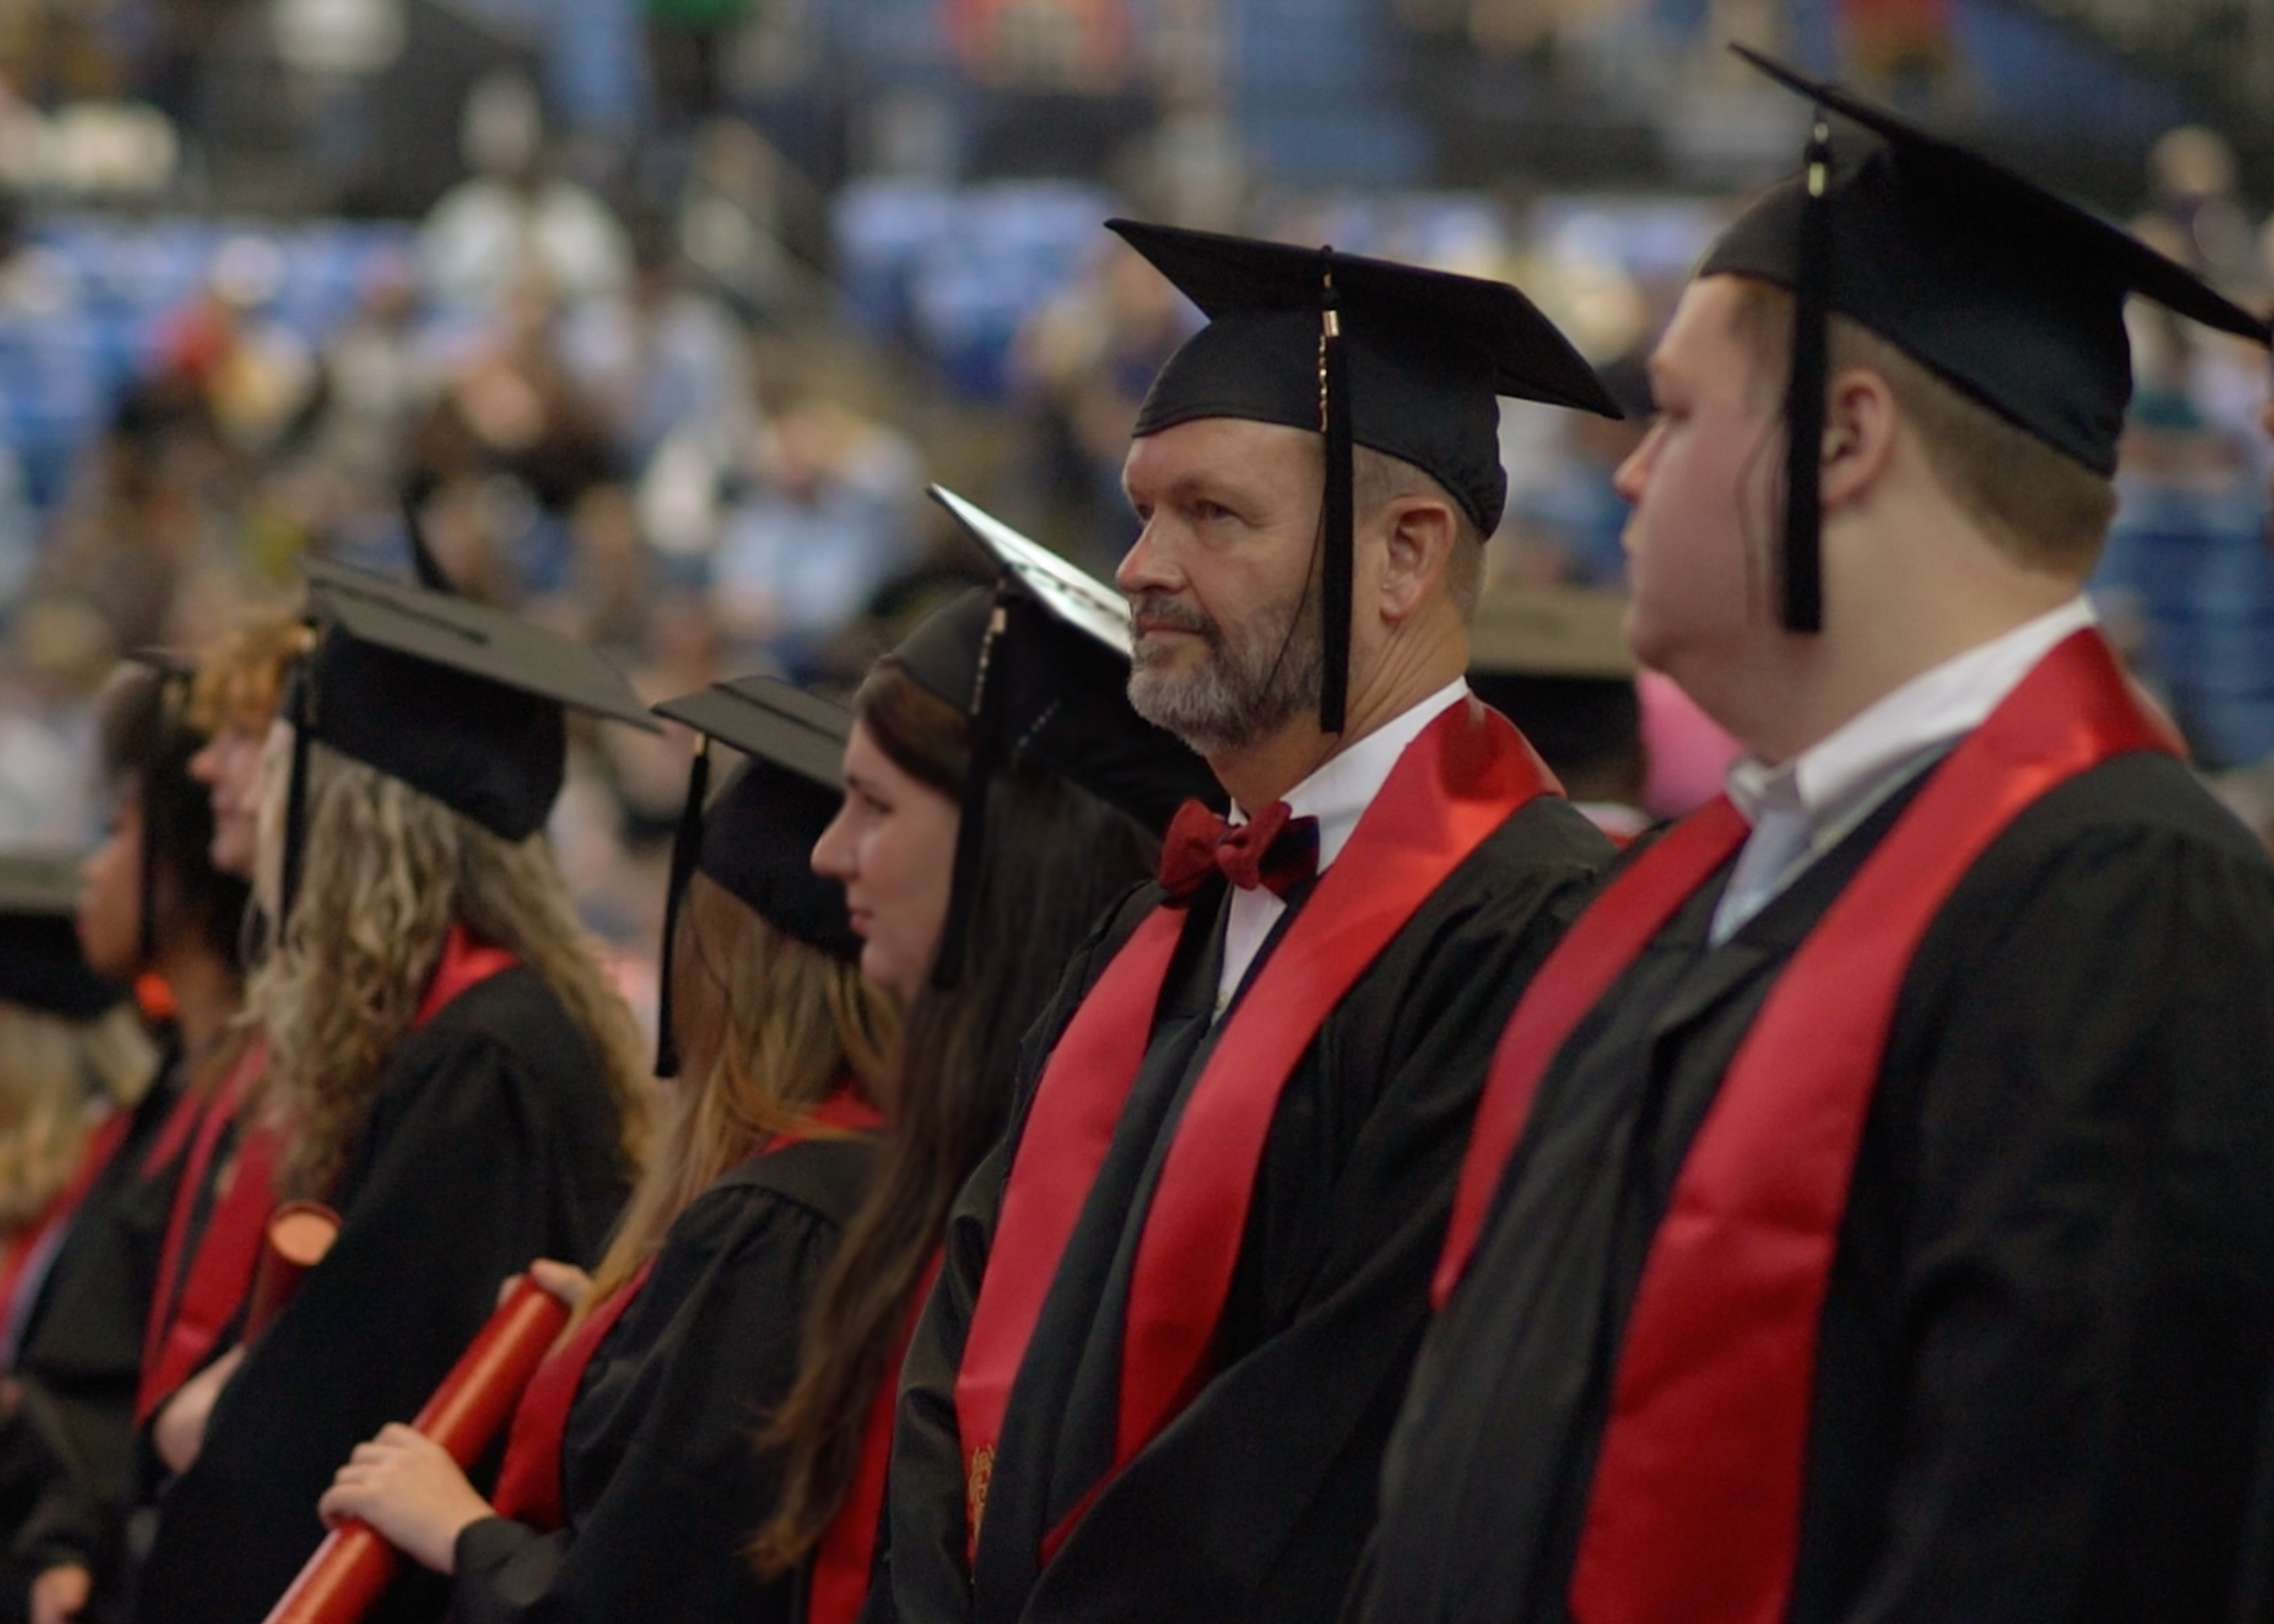 Jim Money in black gown with red stole and grad cap stands in line of graduates facing forward, looking to the left of the picture.